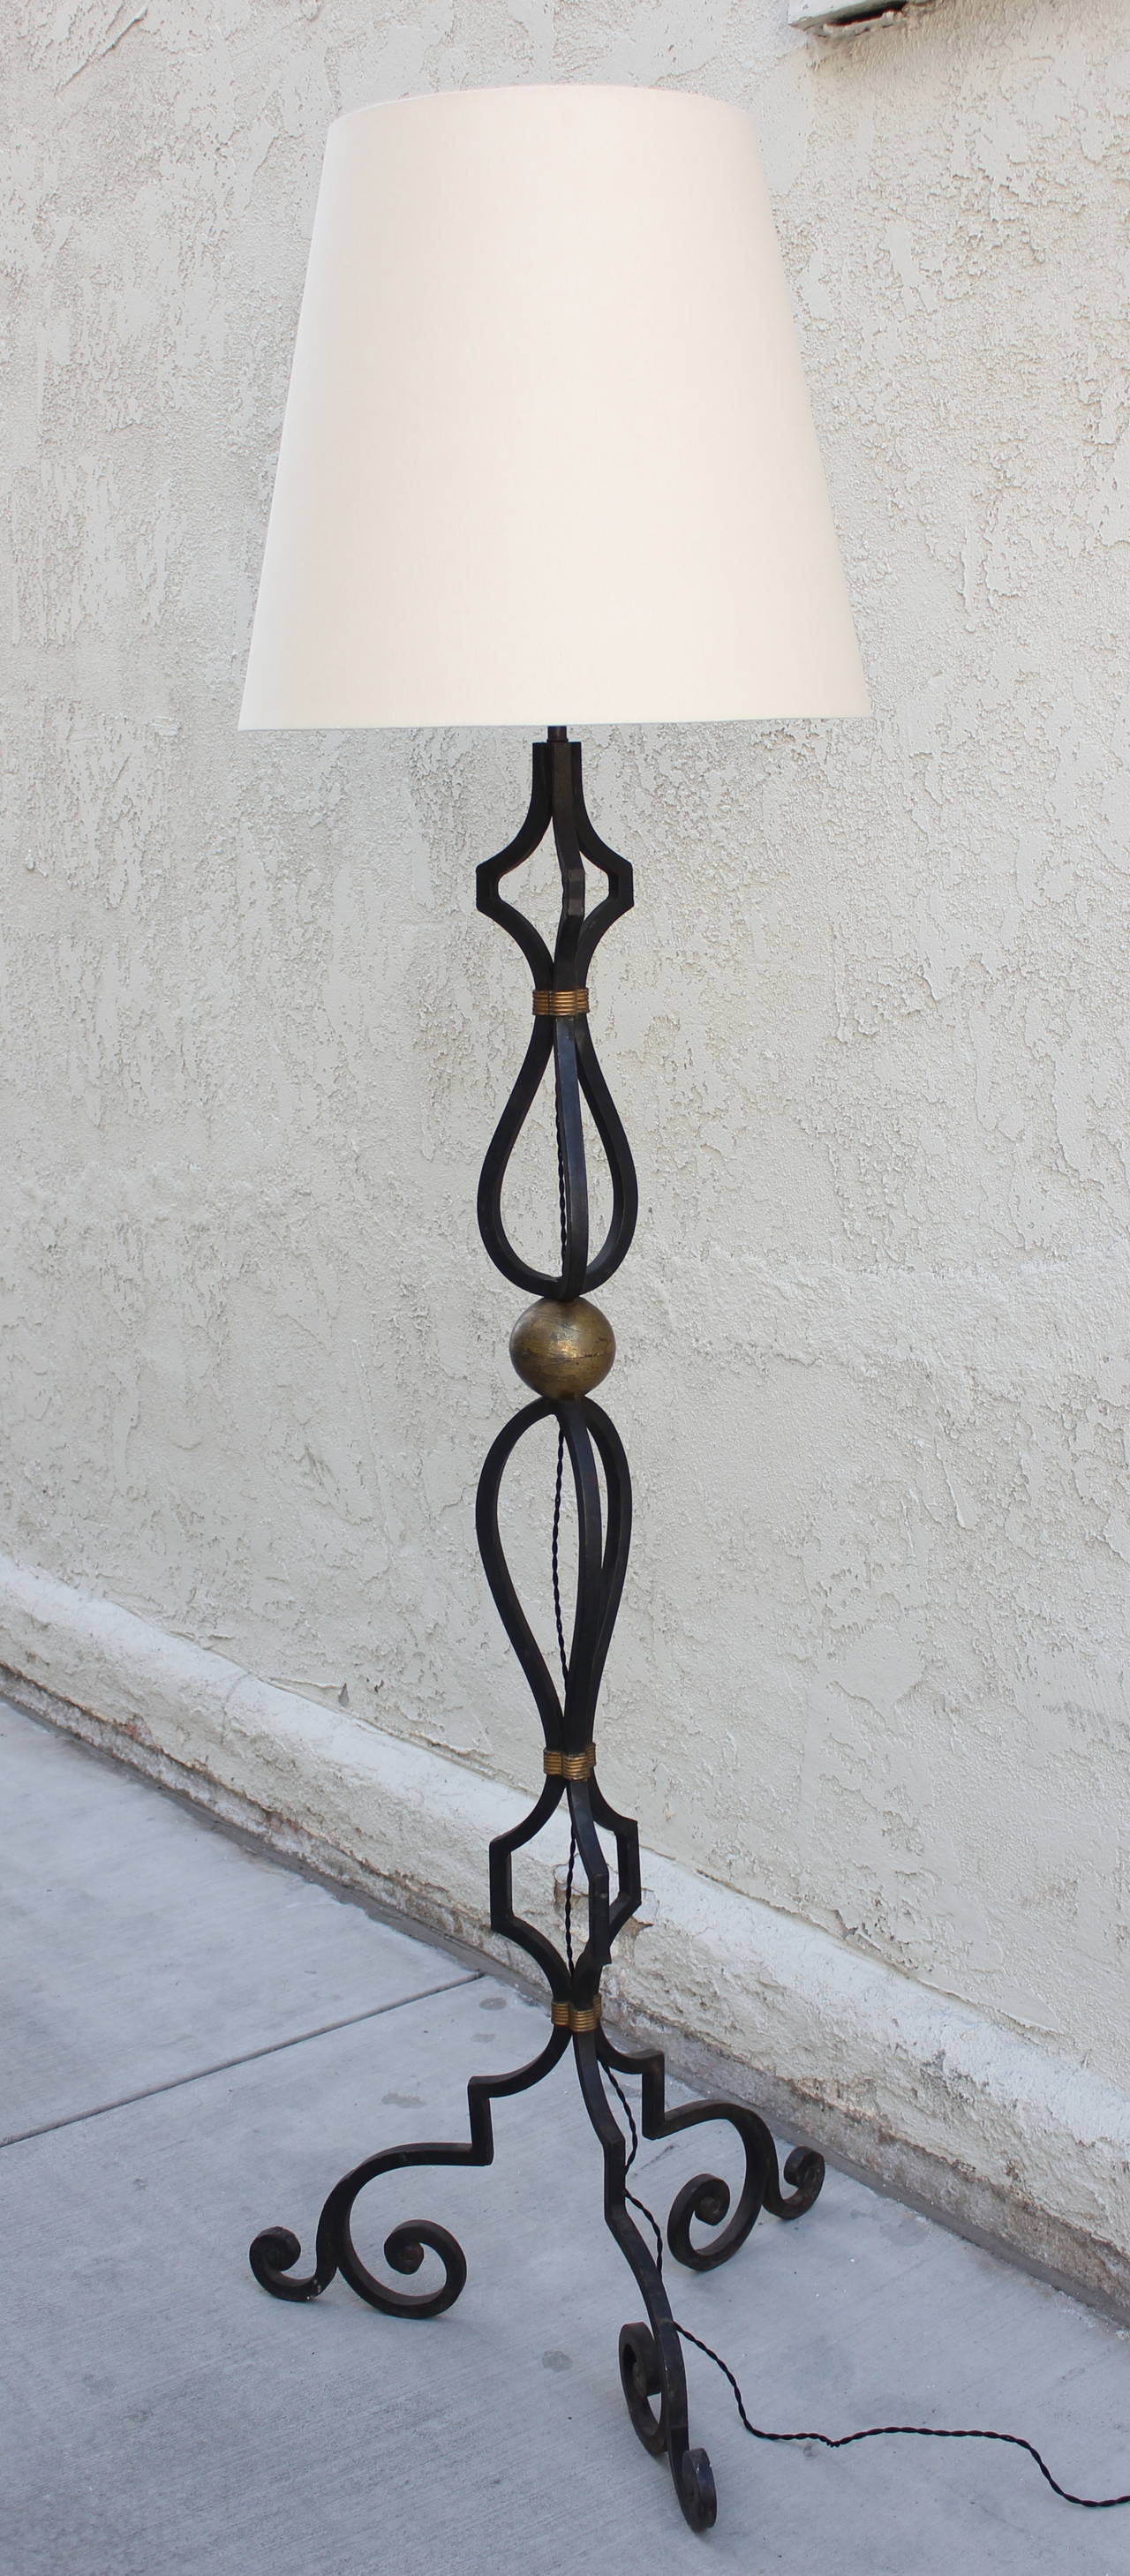 Arturo Pani bronze and wrought iron floor lamp. Executed by Studio Chacon. Mexico City, 1948. Hand-wrought. Rewired. Shade additional $400.00.